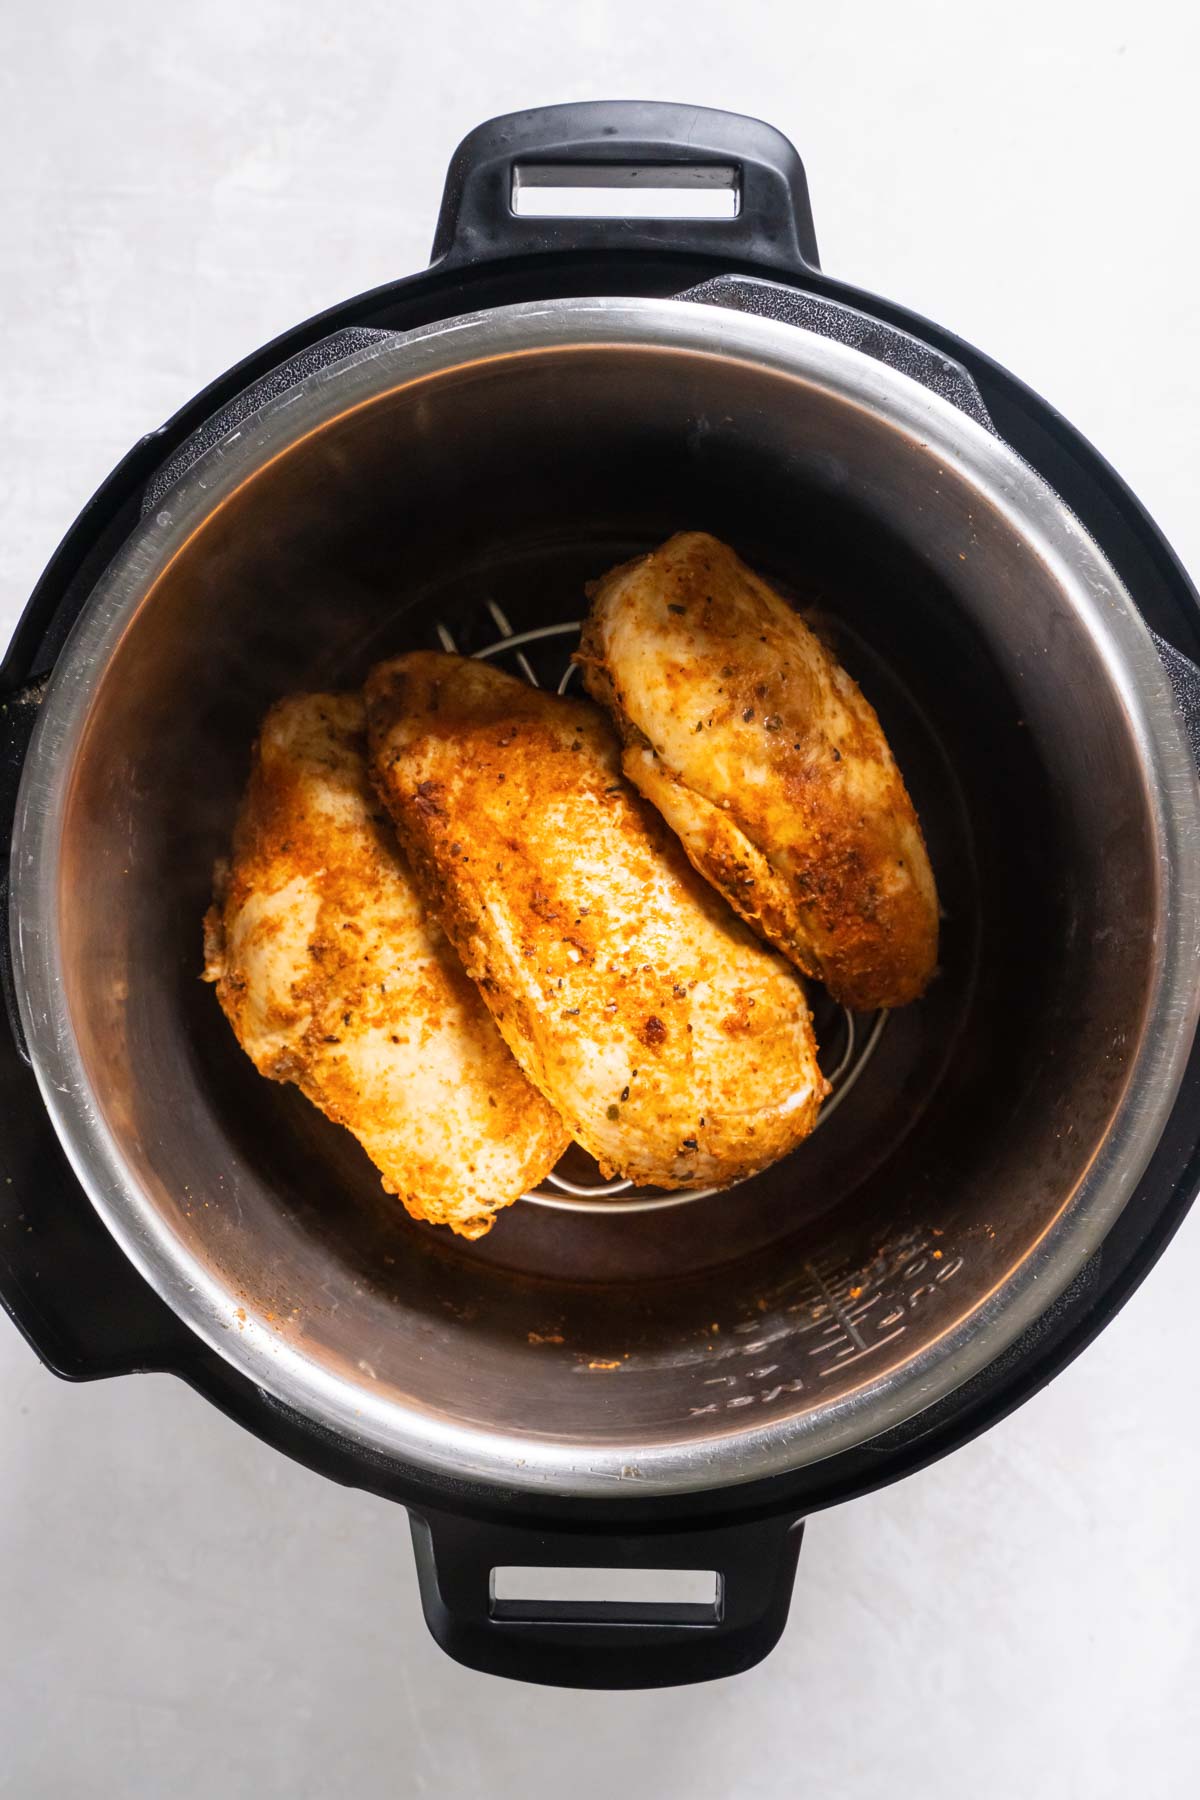 Three cooked chicken breasts on trivet in instant pot.